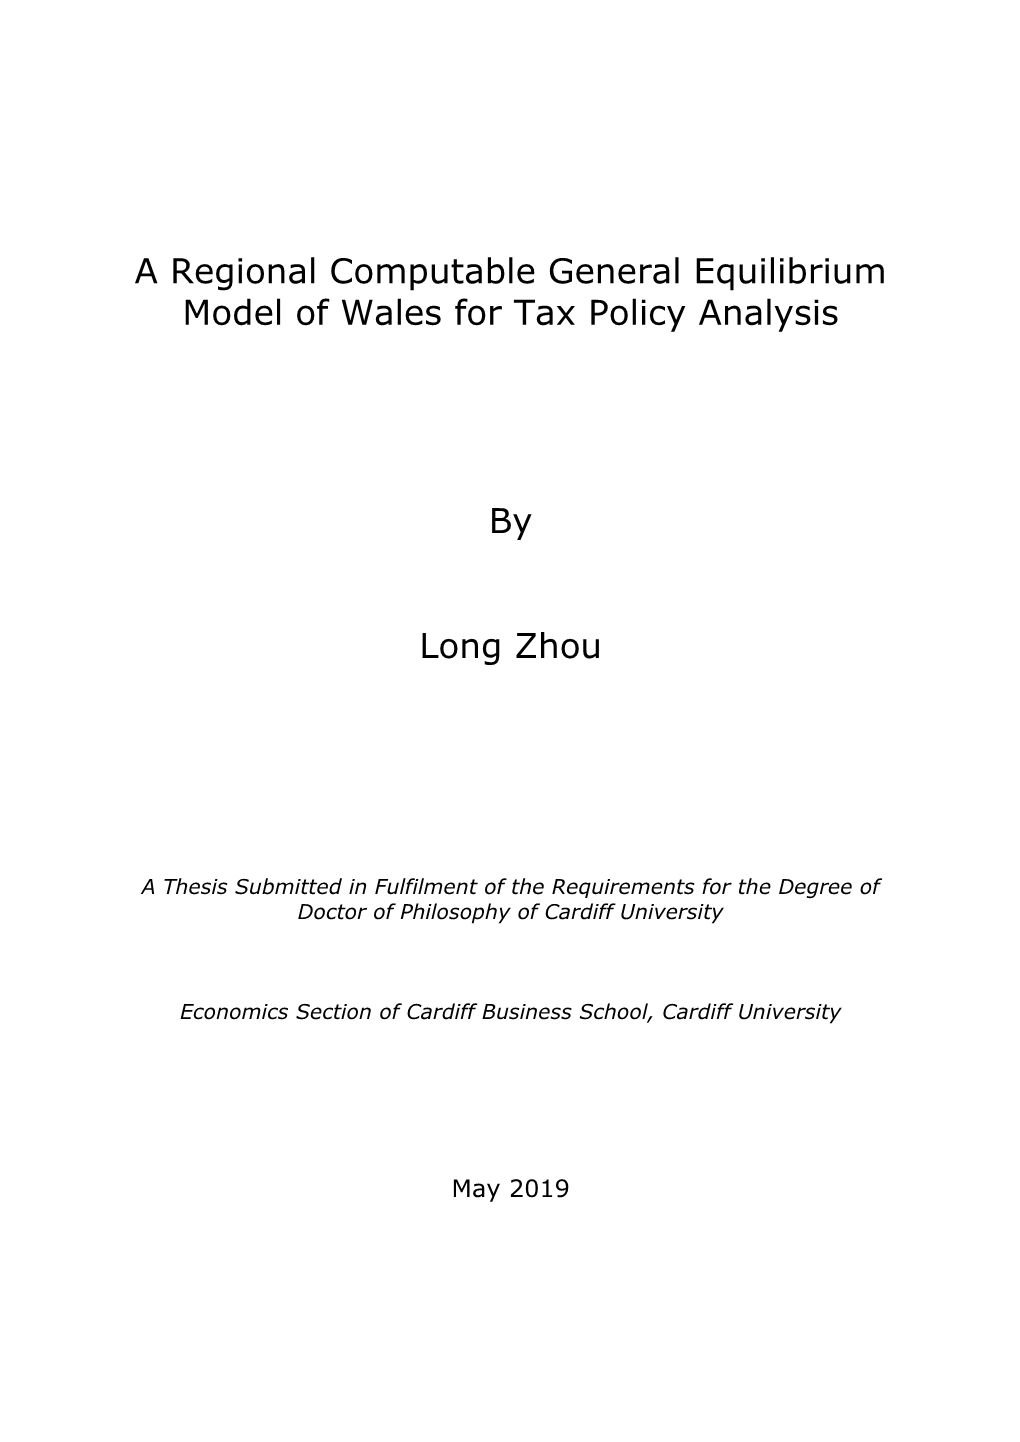 A Regional Computable General Equilibrium Model of Wales for Tax Policy Analysis